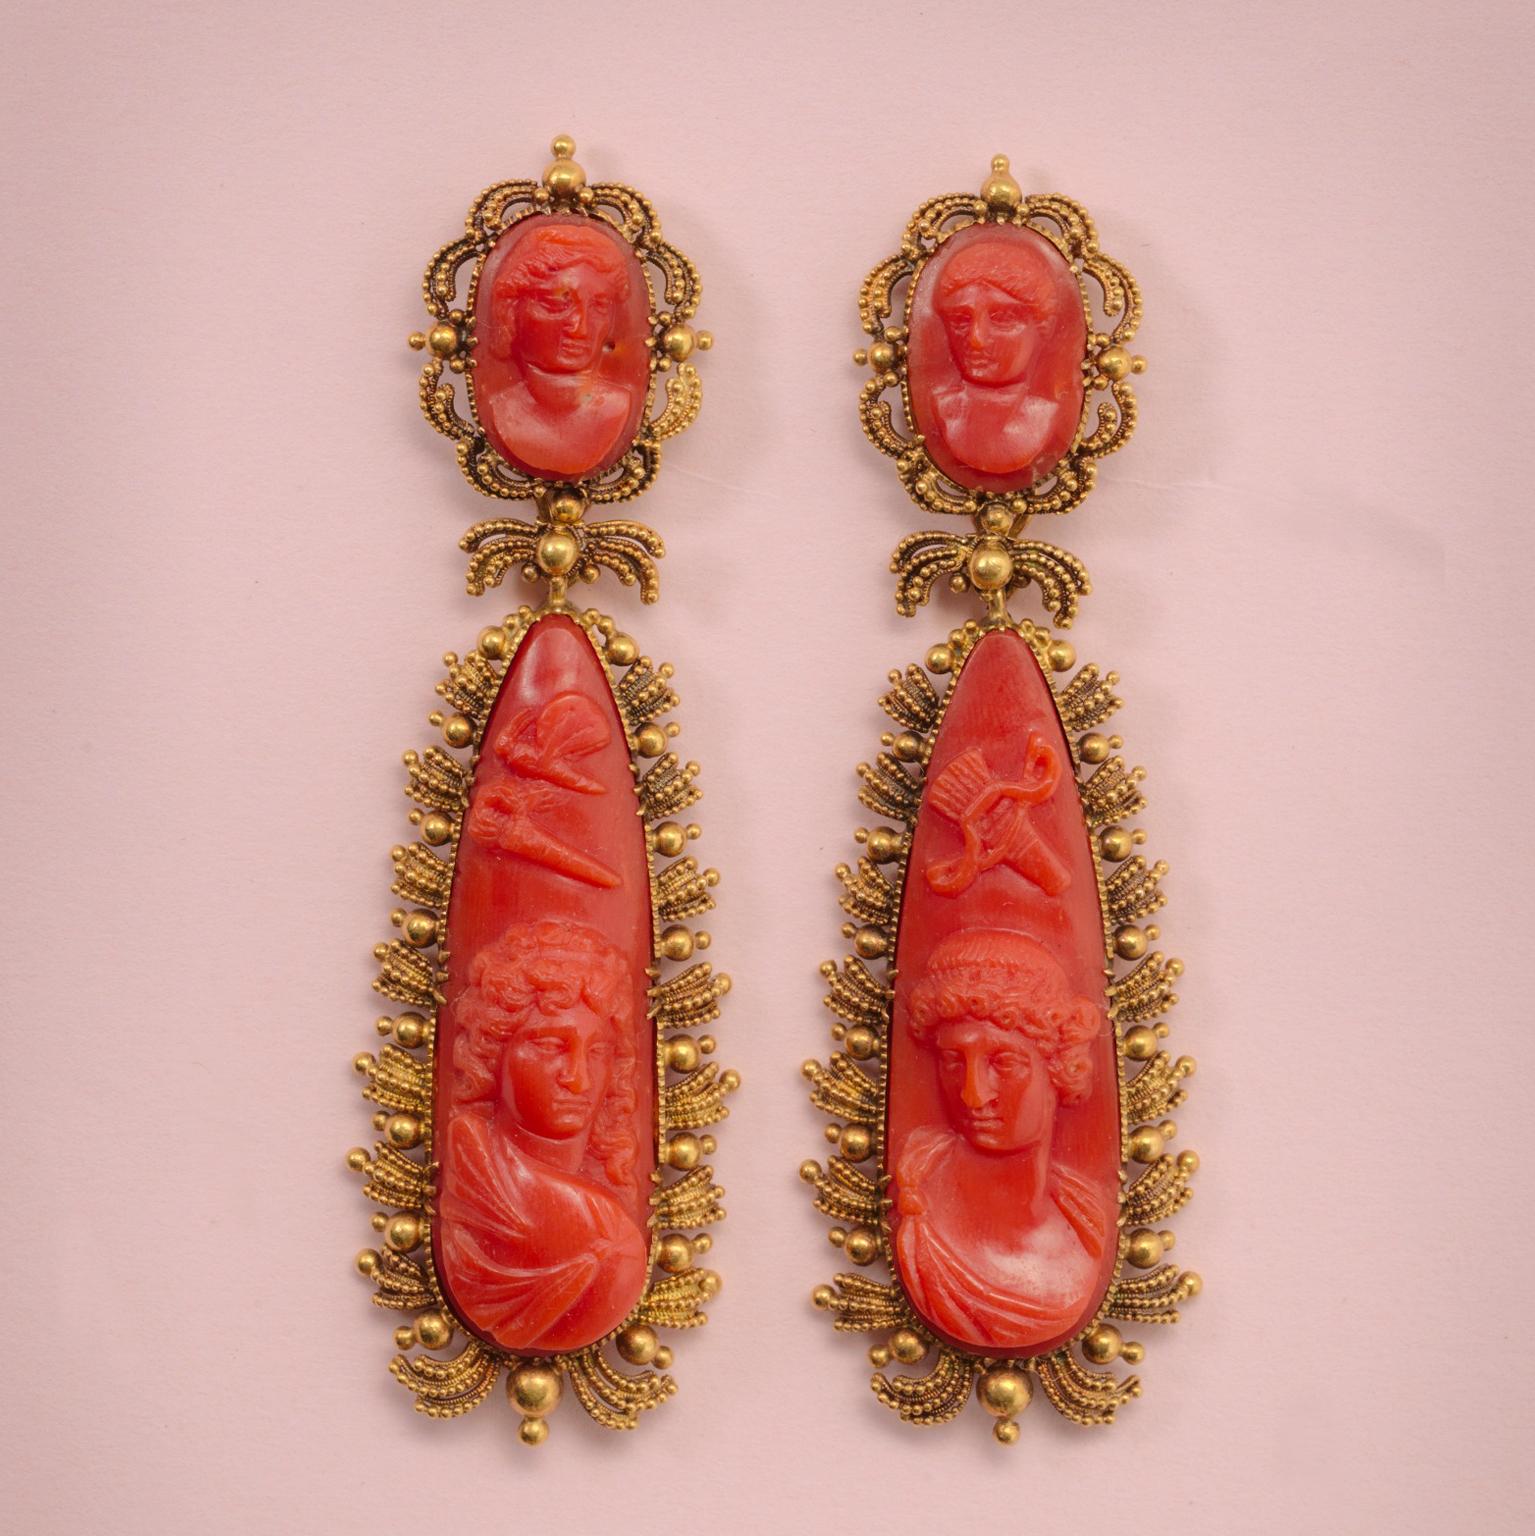 A pair of 15-carat gold and coral - day and night - earrings. The two detachable parts have large, drop-shaped coral cameos. They depict Amor with his bow and arrow and Psyche with a butterfly looking at each other. The smaller oval top parts are